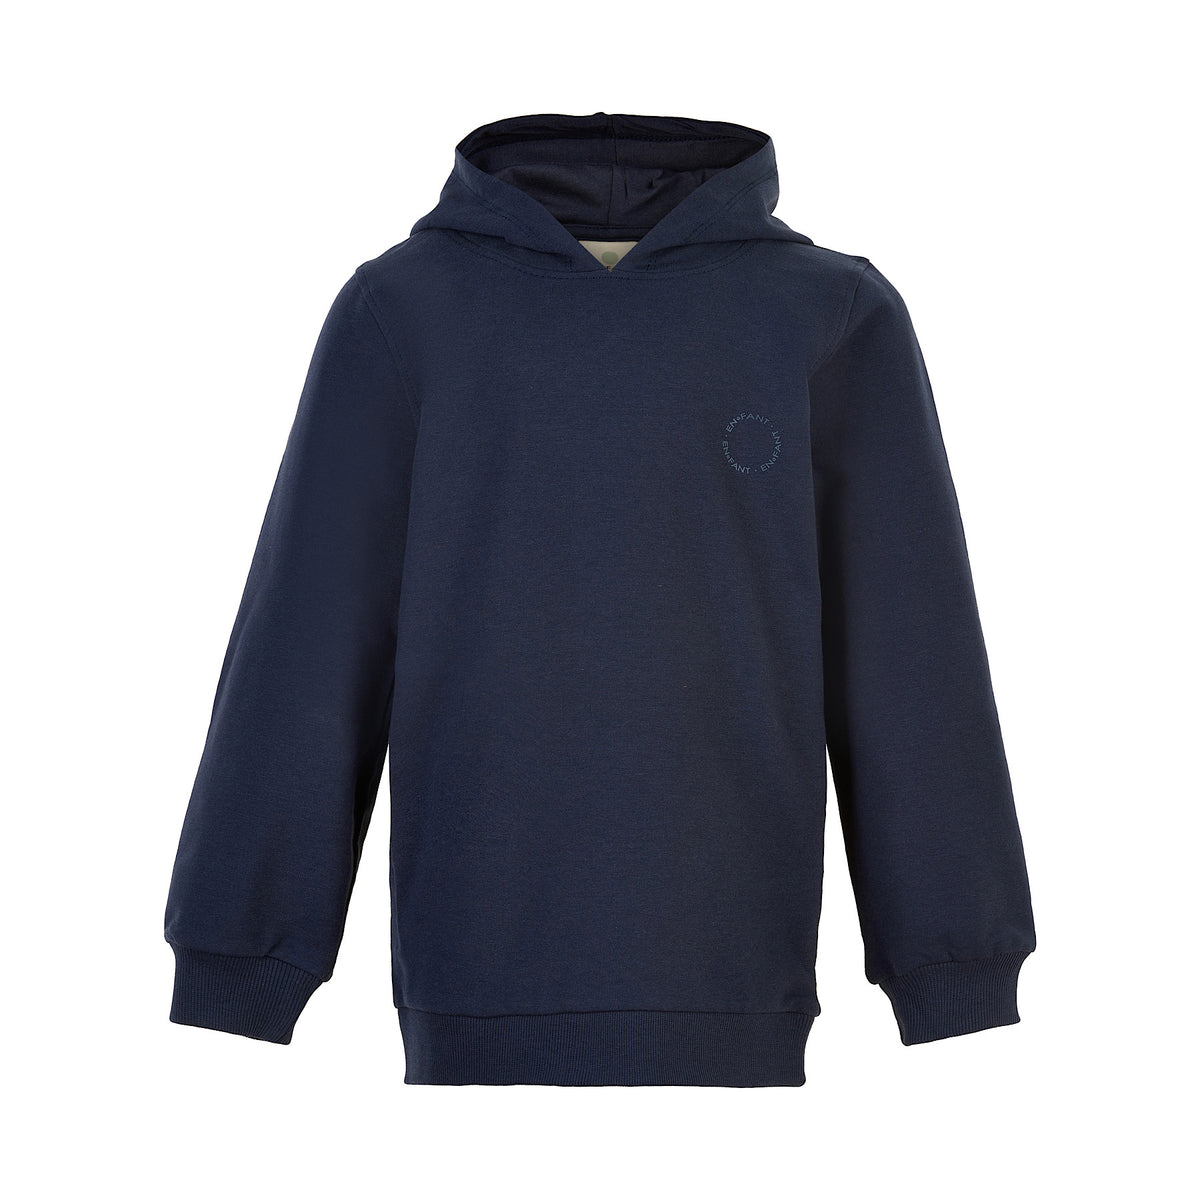 Navy Hooded Sweater